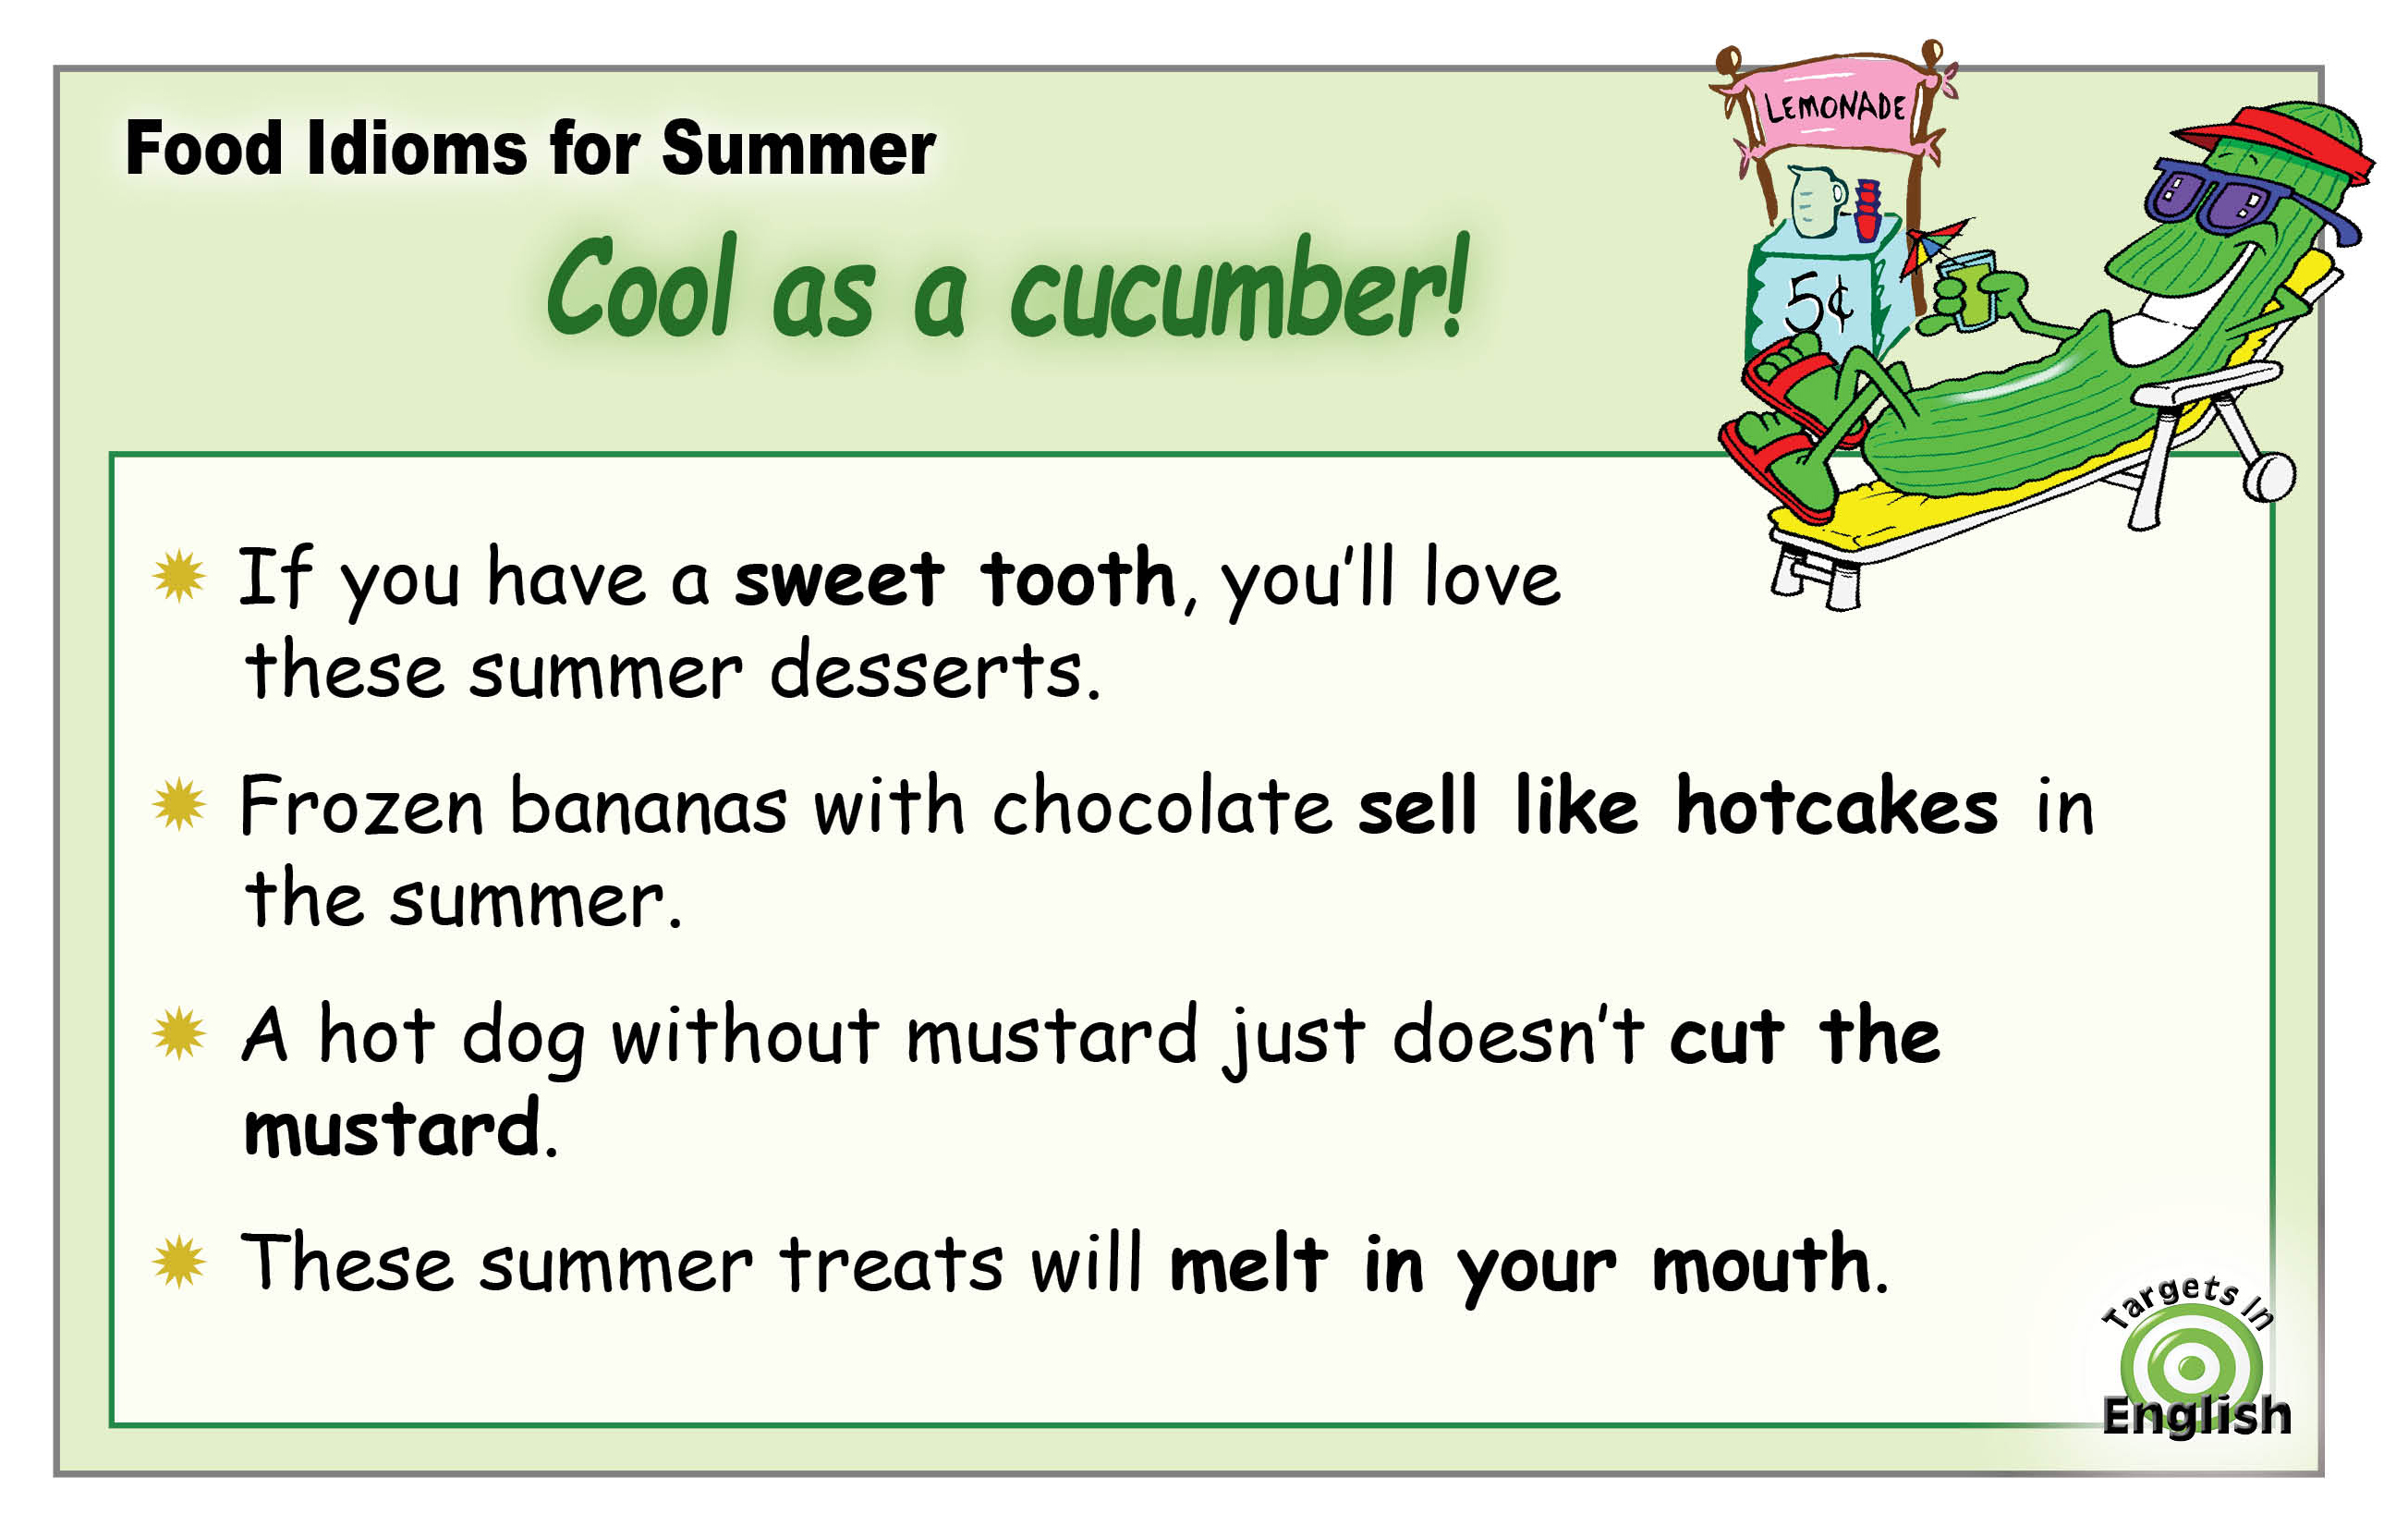 English idioms for summer foods